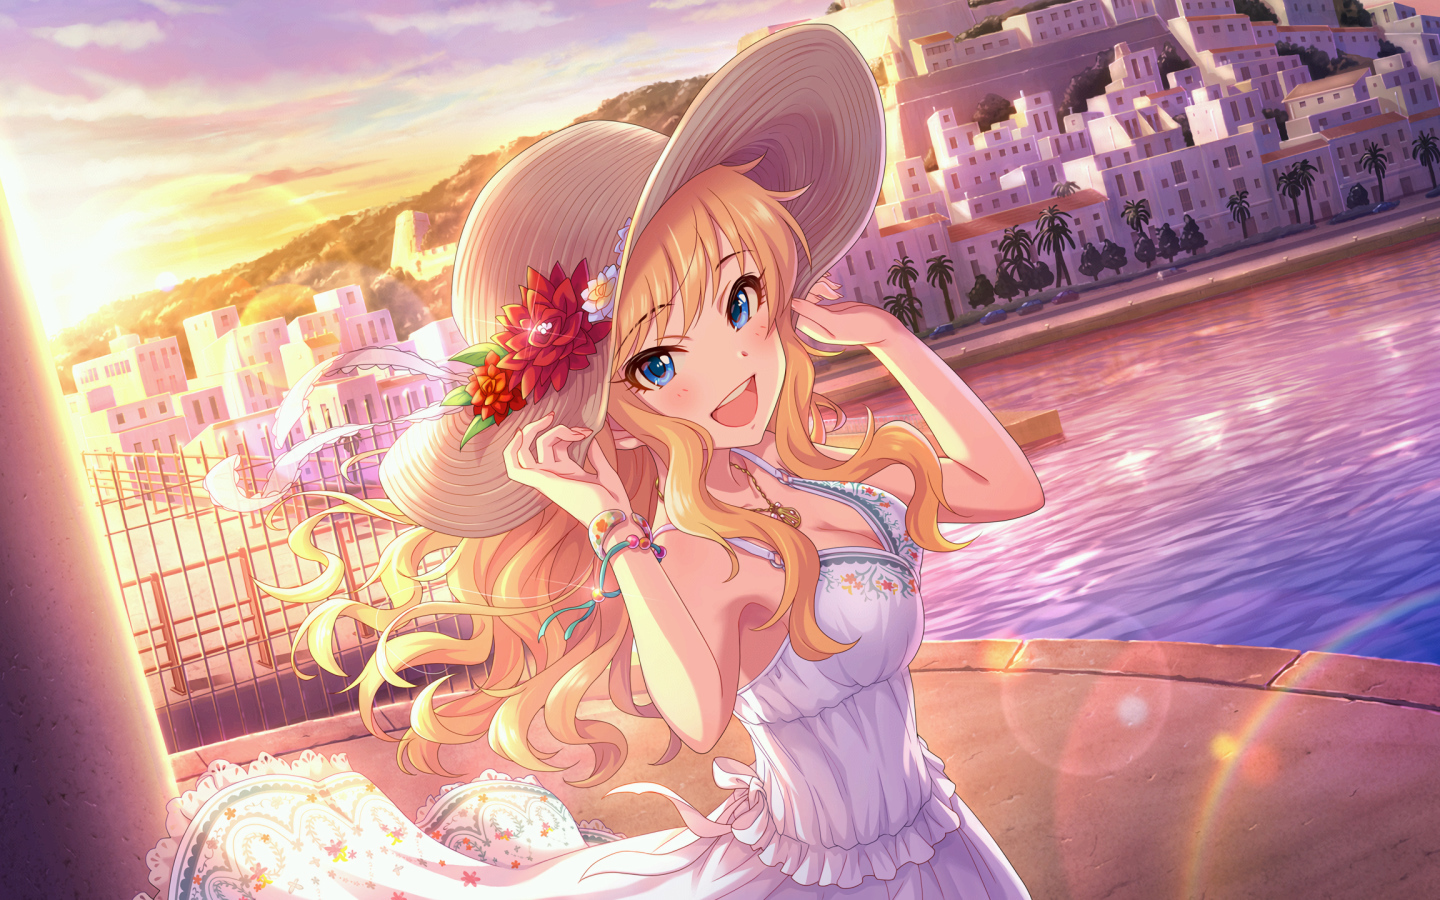 Beautiful anime girl in a hat by the river